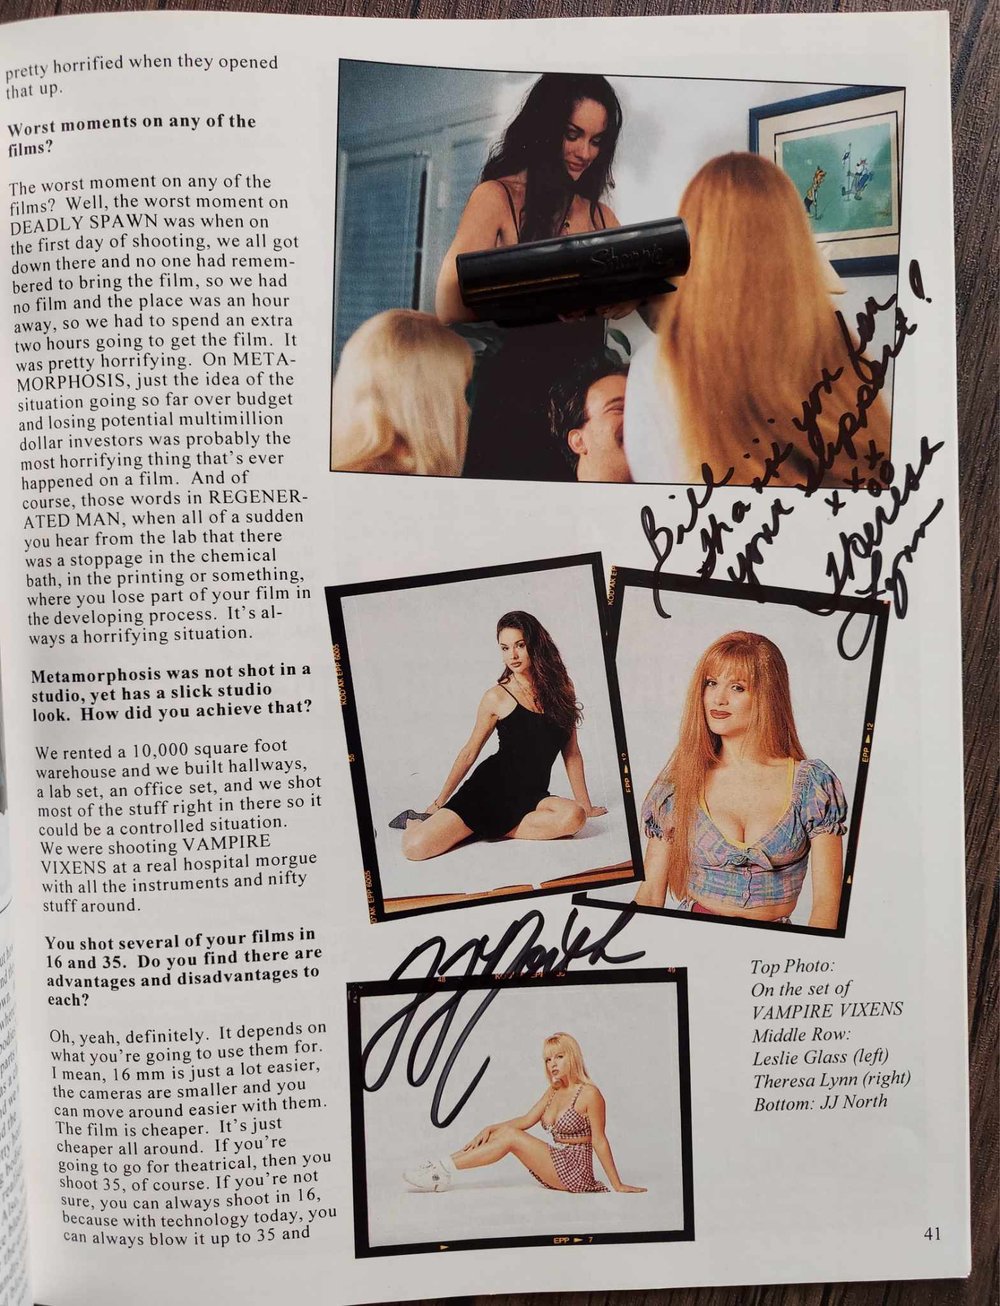 Scream Queens Illustrated Number 7 - SIGNED by Julie Strain +6